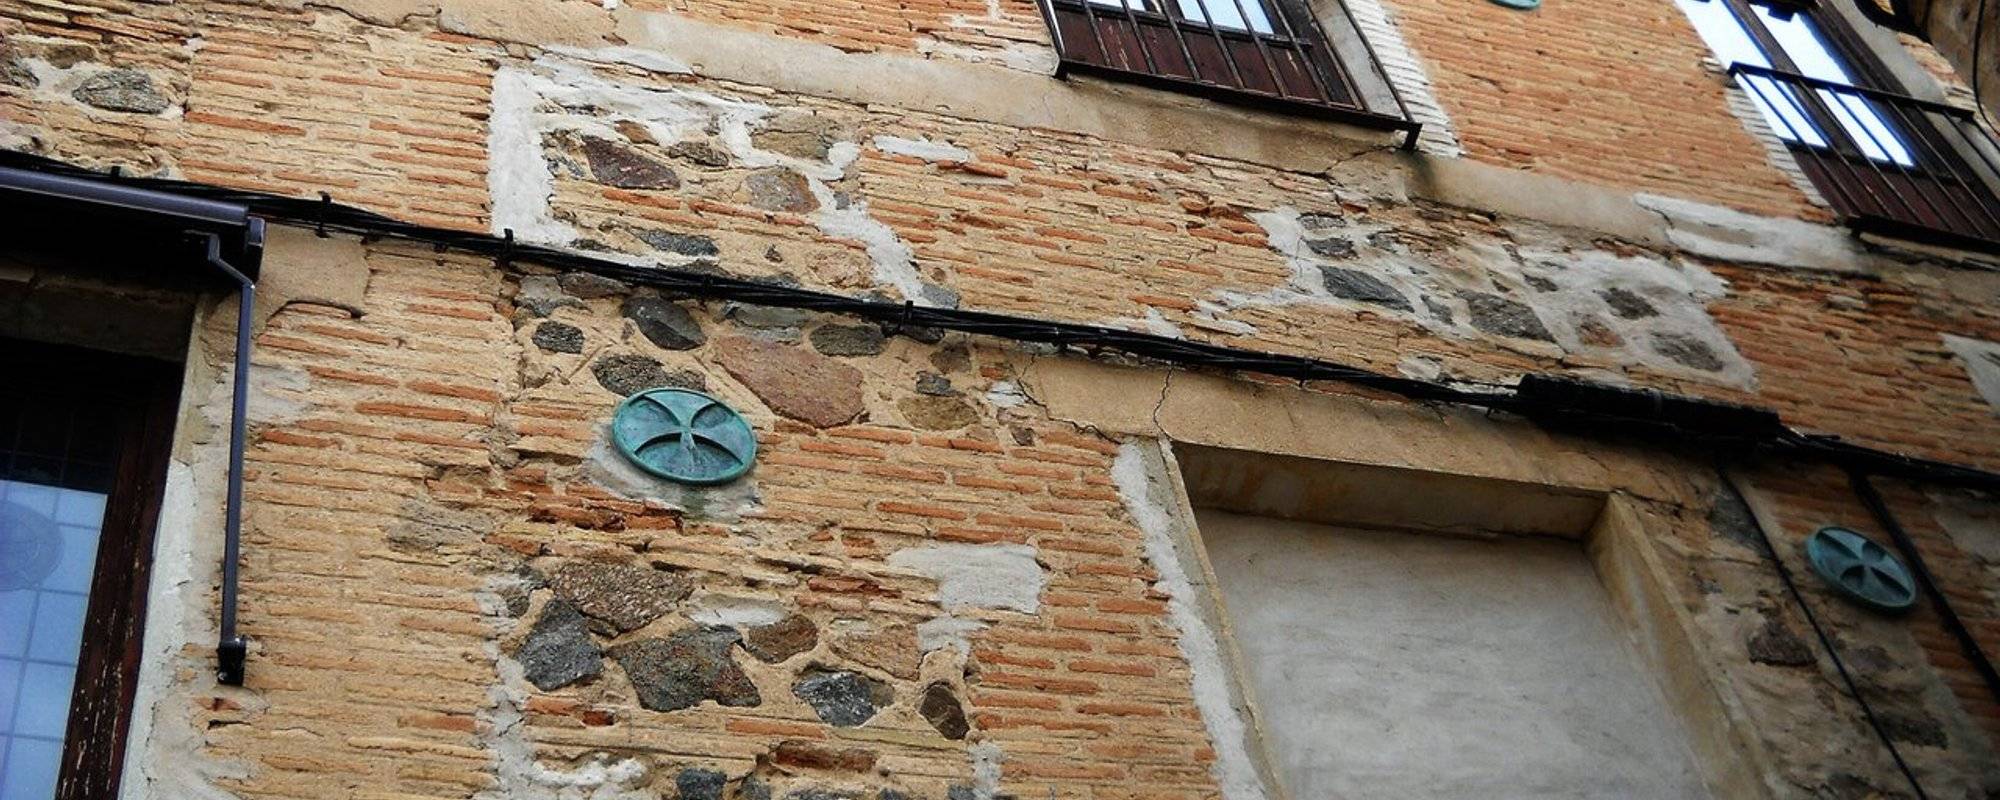 Mysterious Toledo: the Houses of the Temple and the Alleys of the Devil and Hell